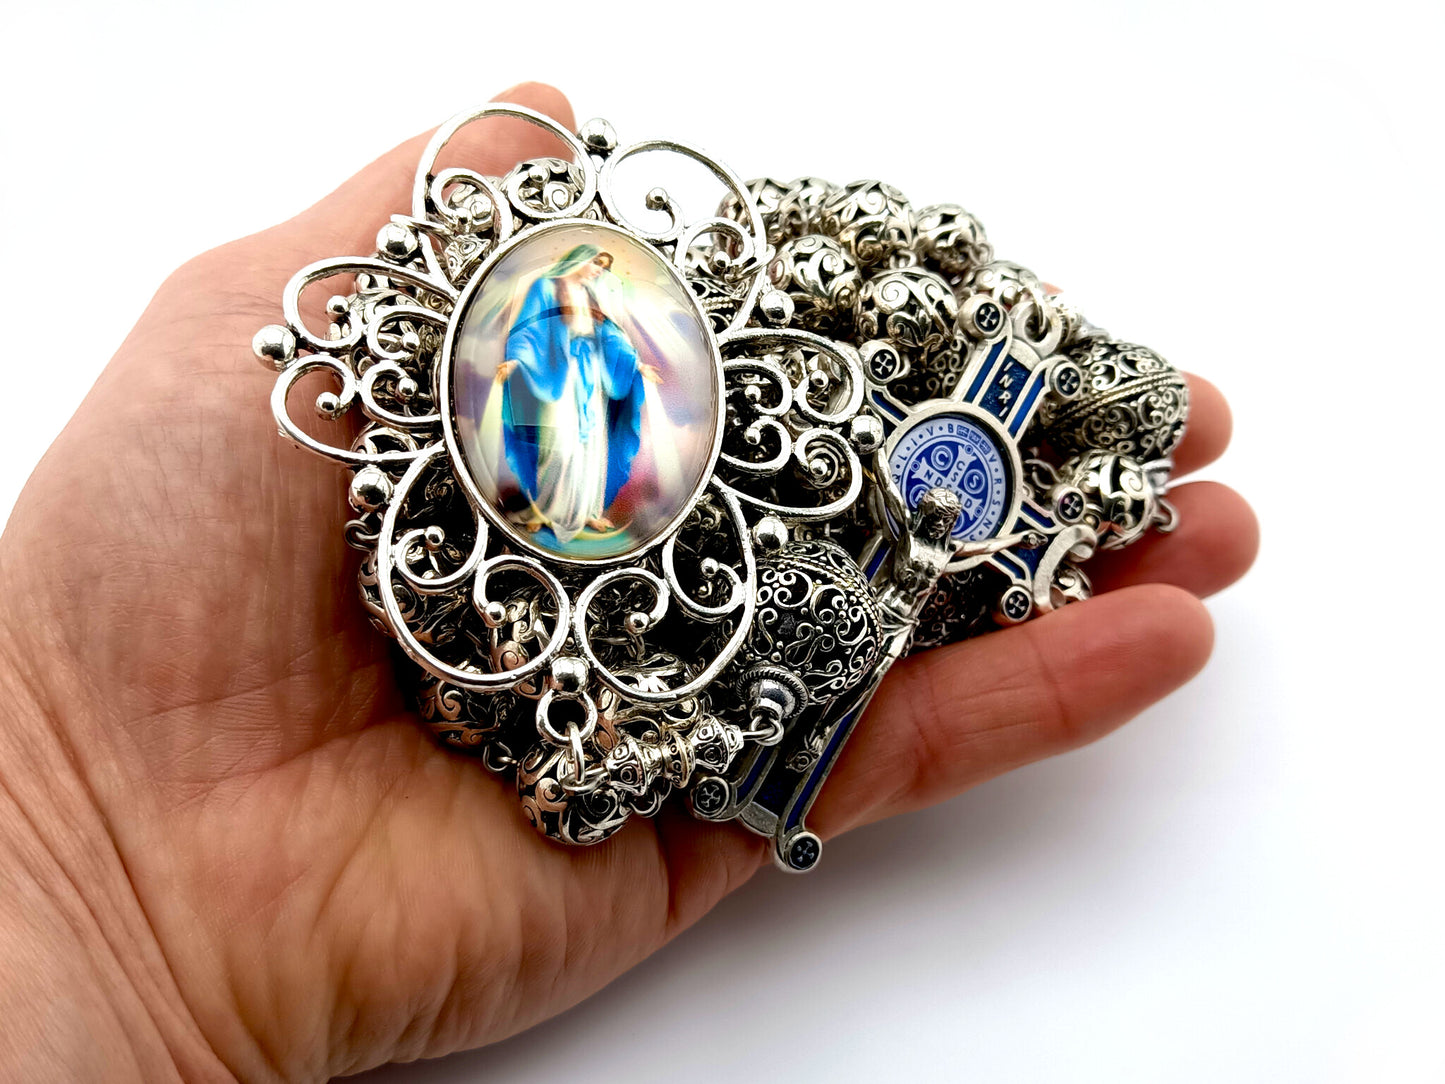 Handcrafted Ex Large Wall Virgin Mary silver Rosary, Large Tibetan silver Rosary, Spiritual Rosary beads, The Immaculate Conception Rosary.